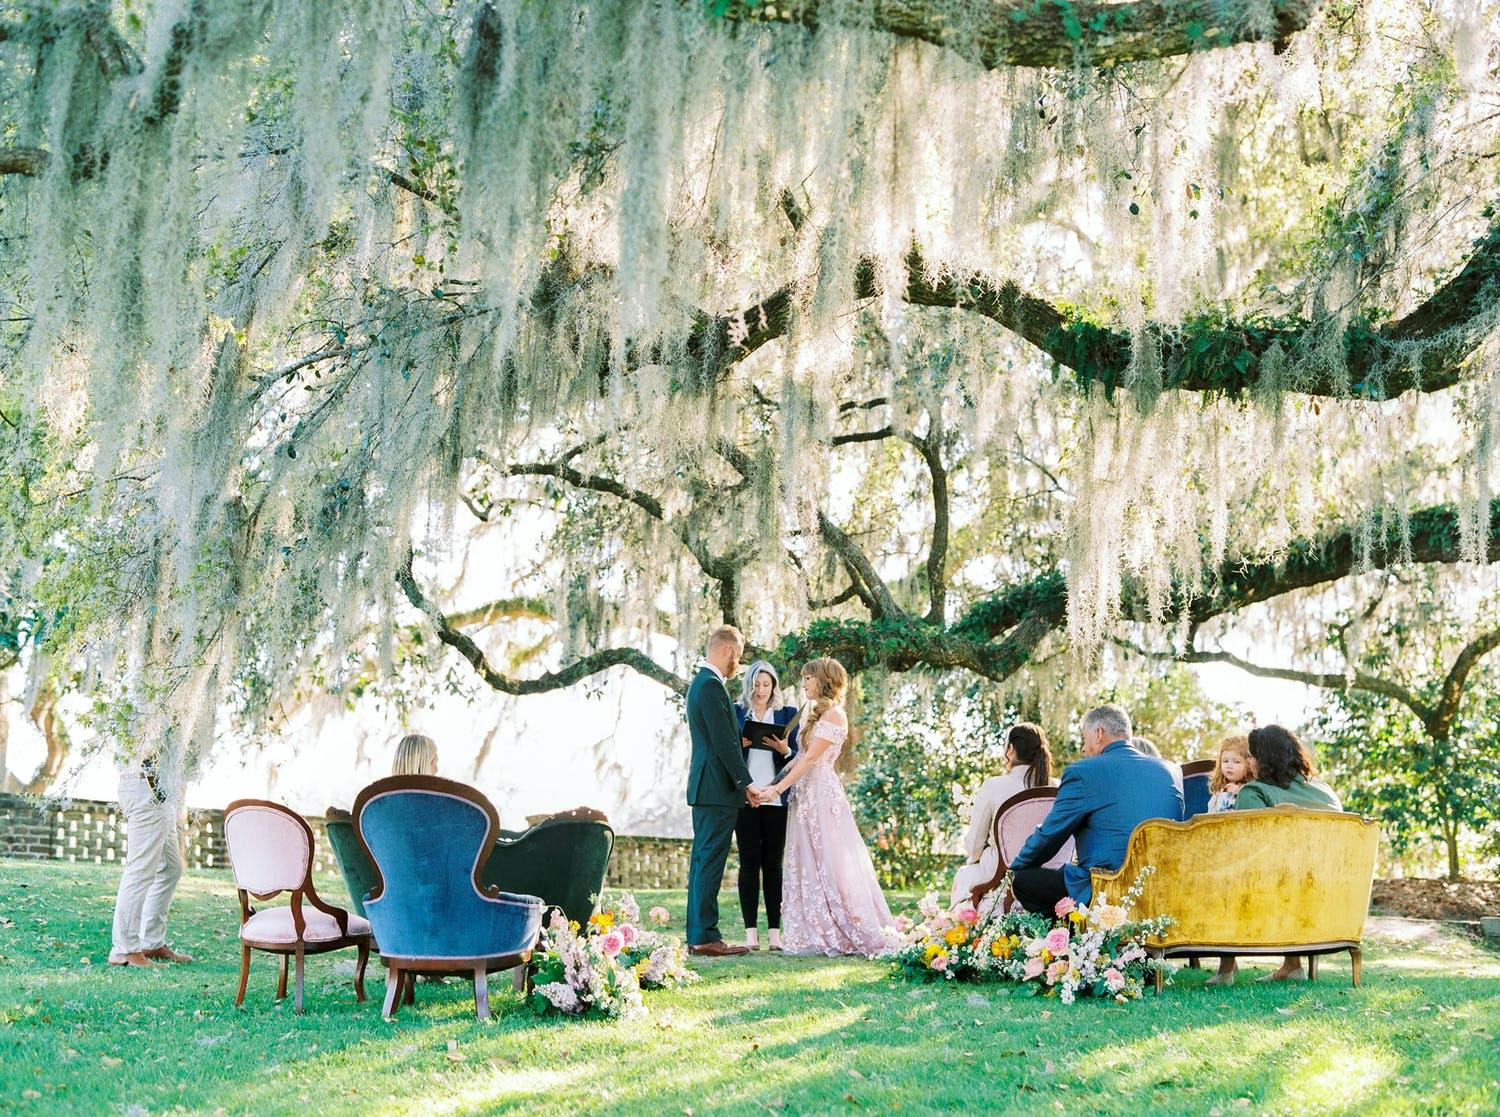 Elopement wedding ceremony in front of willow tree with colorful and eclectic vintage seating | PartySlate